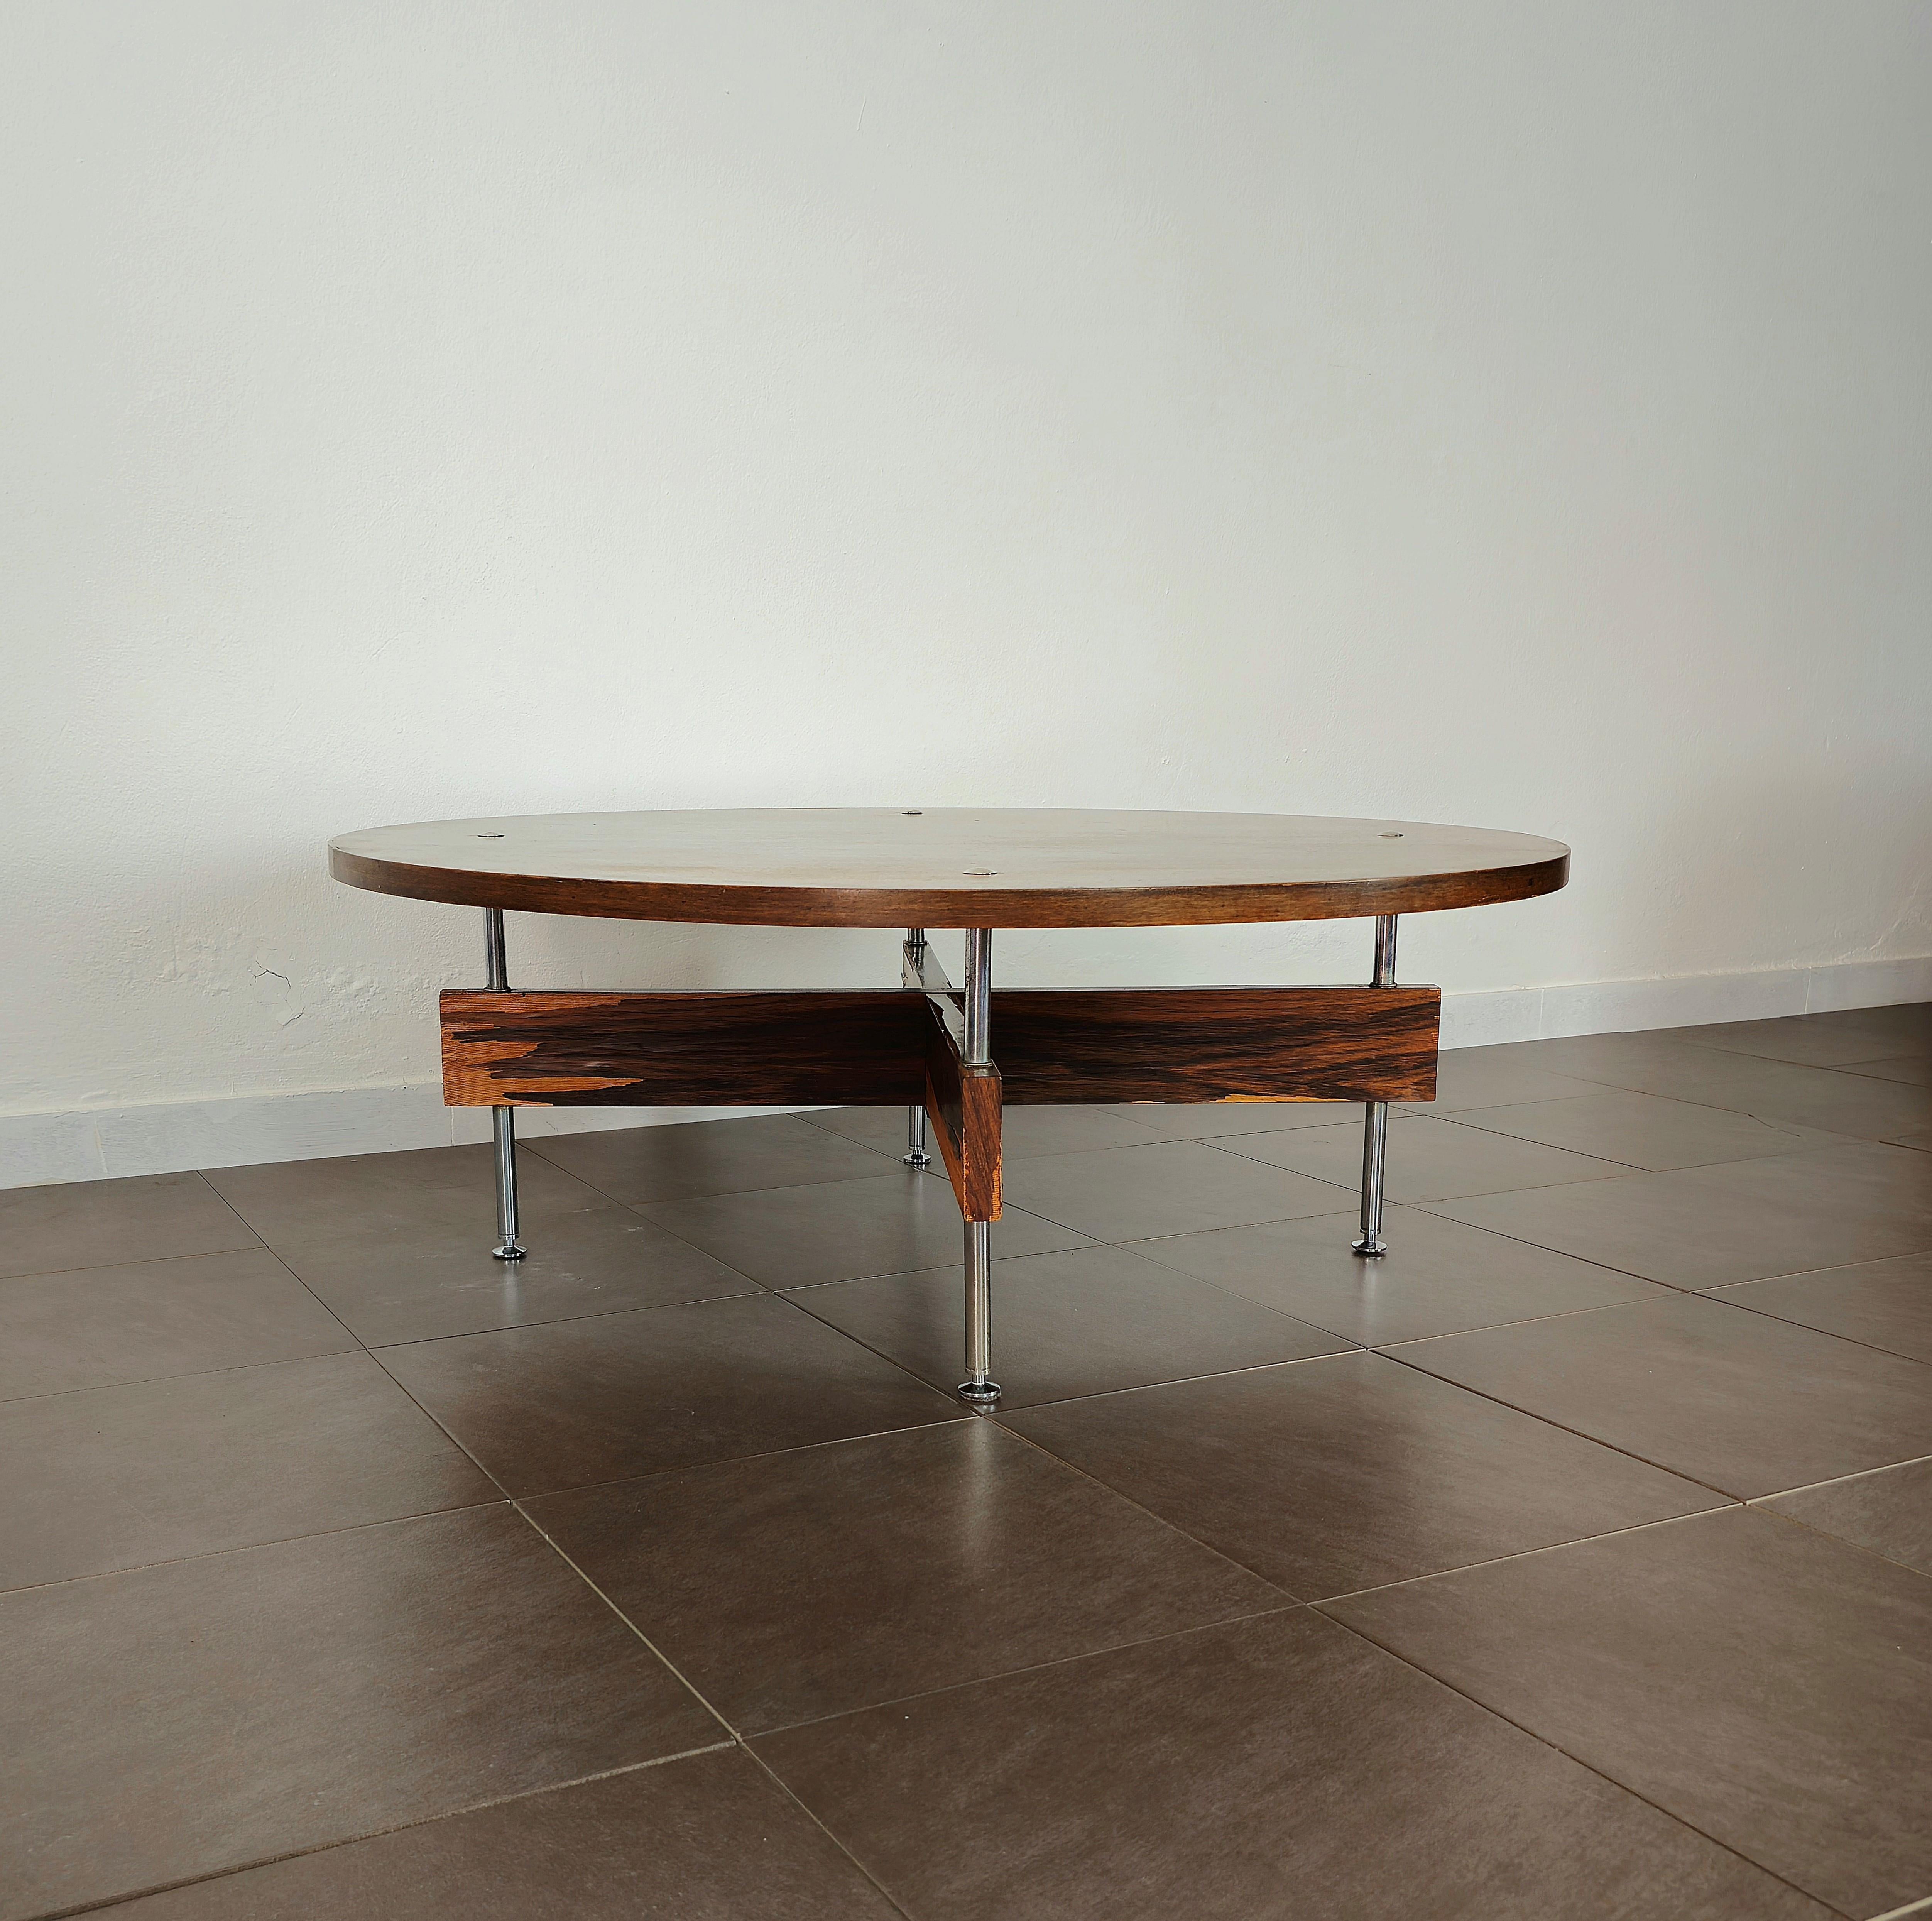 Low coffee table produced in Italy in the 60s by Stildomus.
The coffee table was made with a circular wooden top that rests on 4 feet in a cross structure. The feet are in chromed metal and brass.



Note: We try to offer our customers an excellent